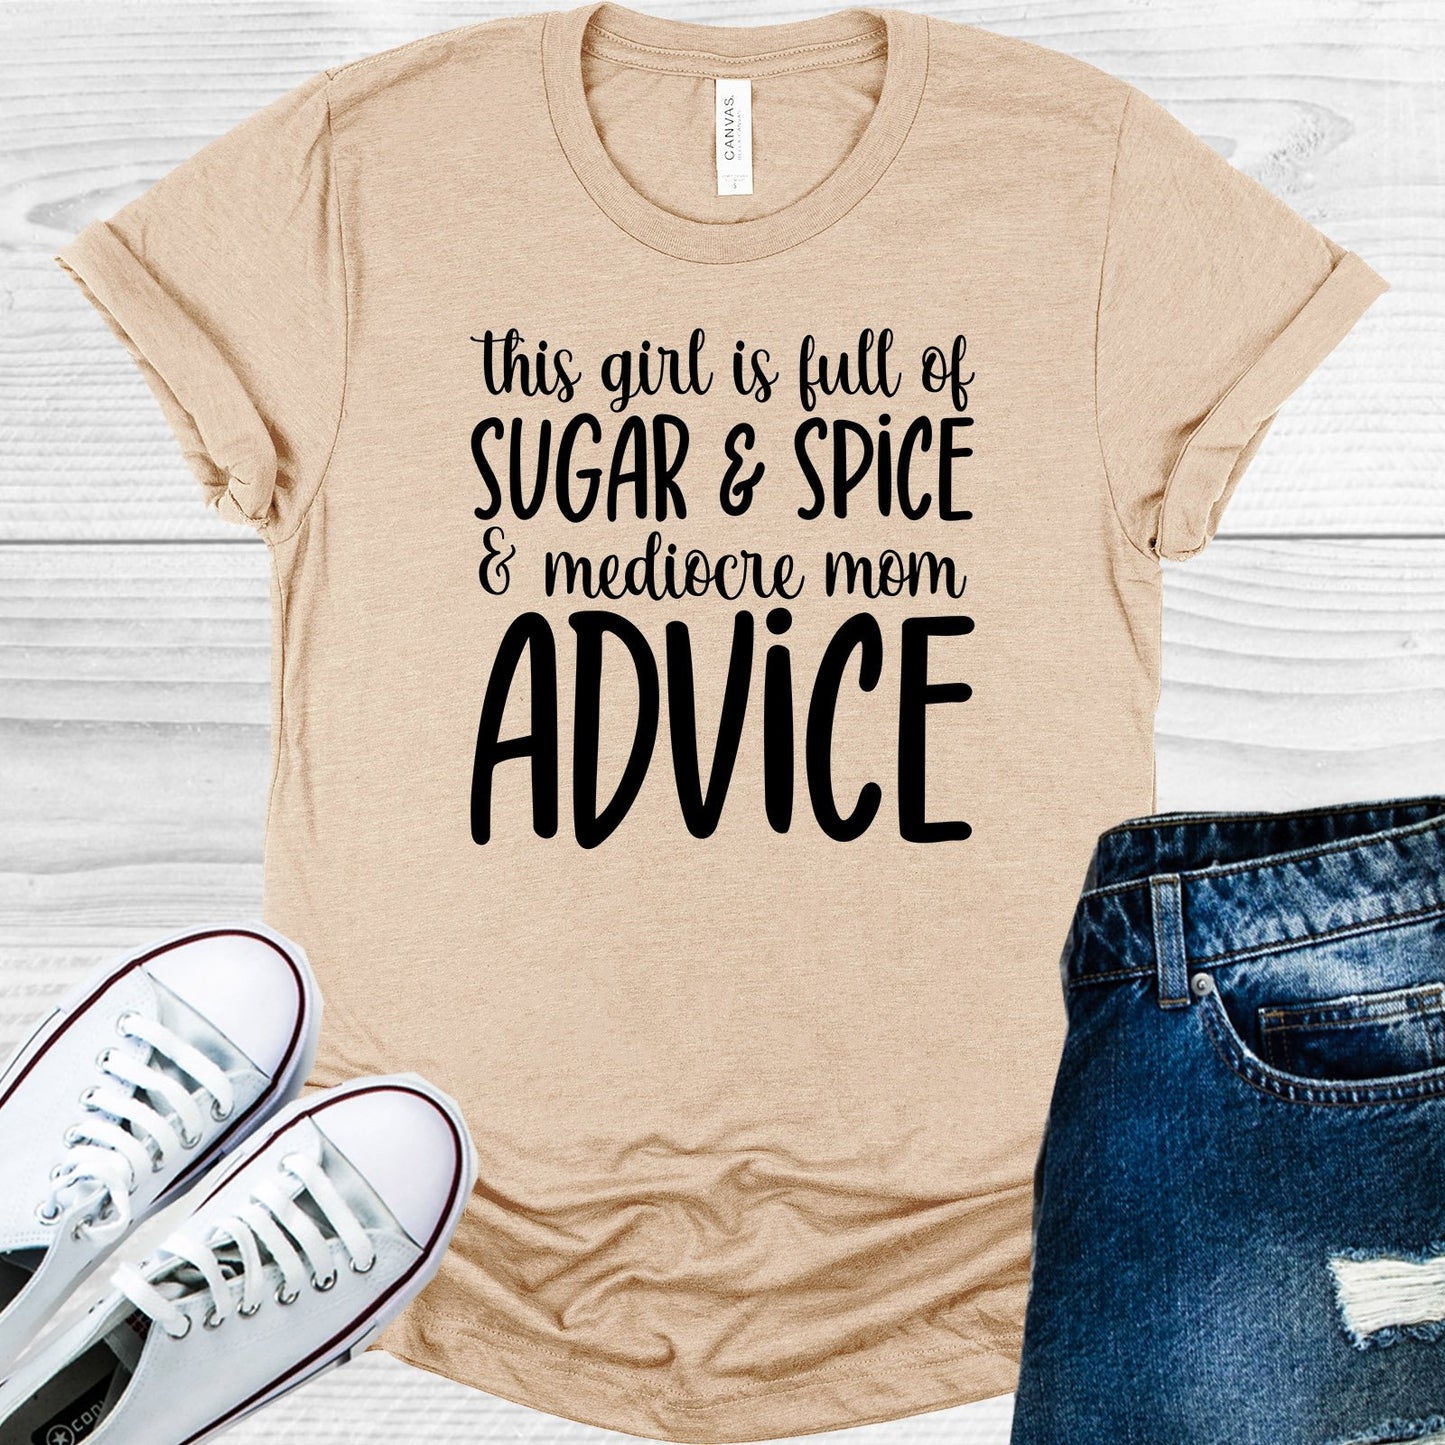 This Girl Is Full Of Sugar & Spice Mediocre Mom Advice Graphic Tee Graphic Tee